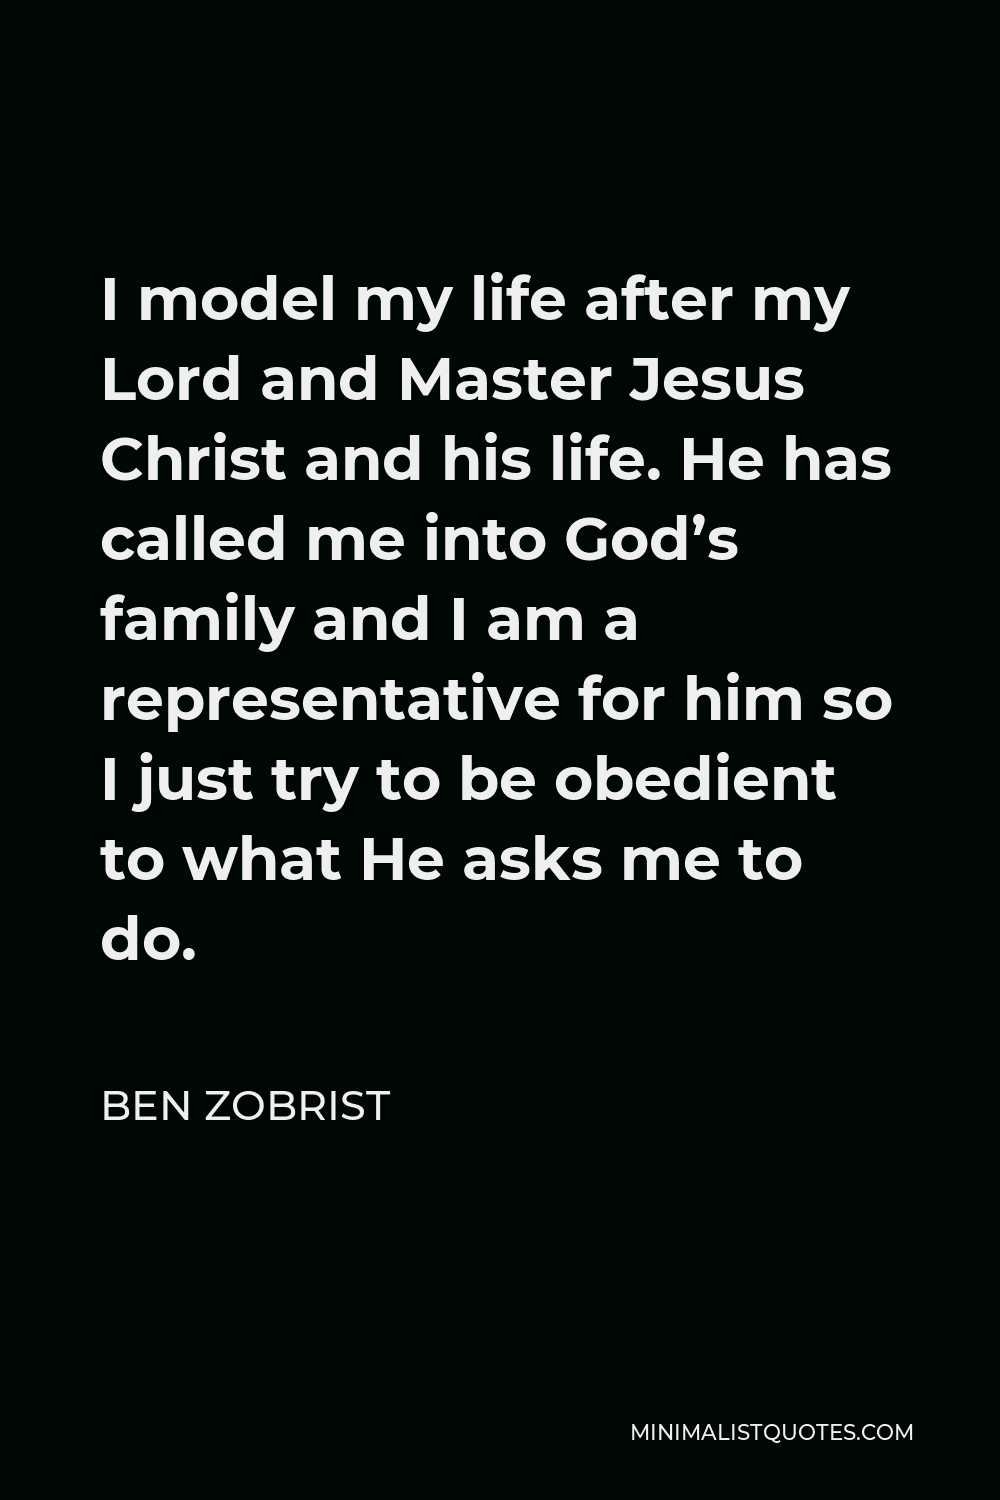 Ben Zobrist Quote - I model my life after my Lord and Master Jesus Christ and his life. He has called me into God’s family and I am a representative for him so I just try to be obedient to what He asks me to do.